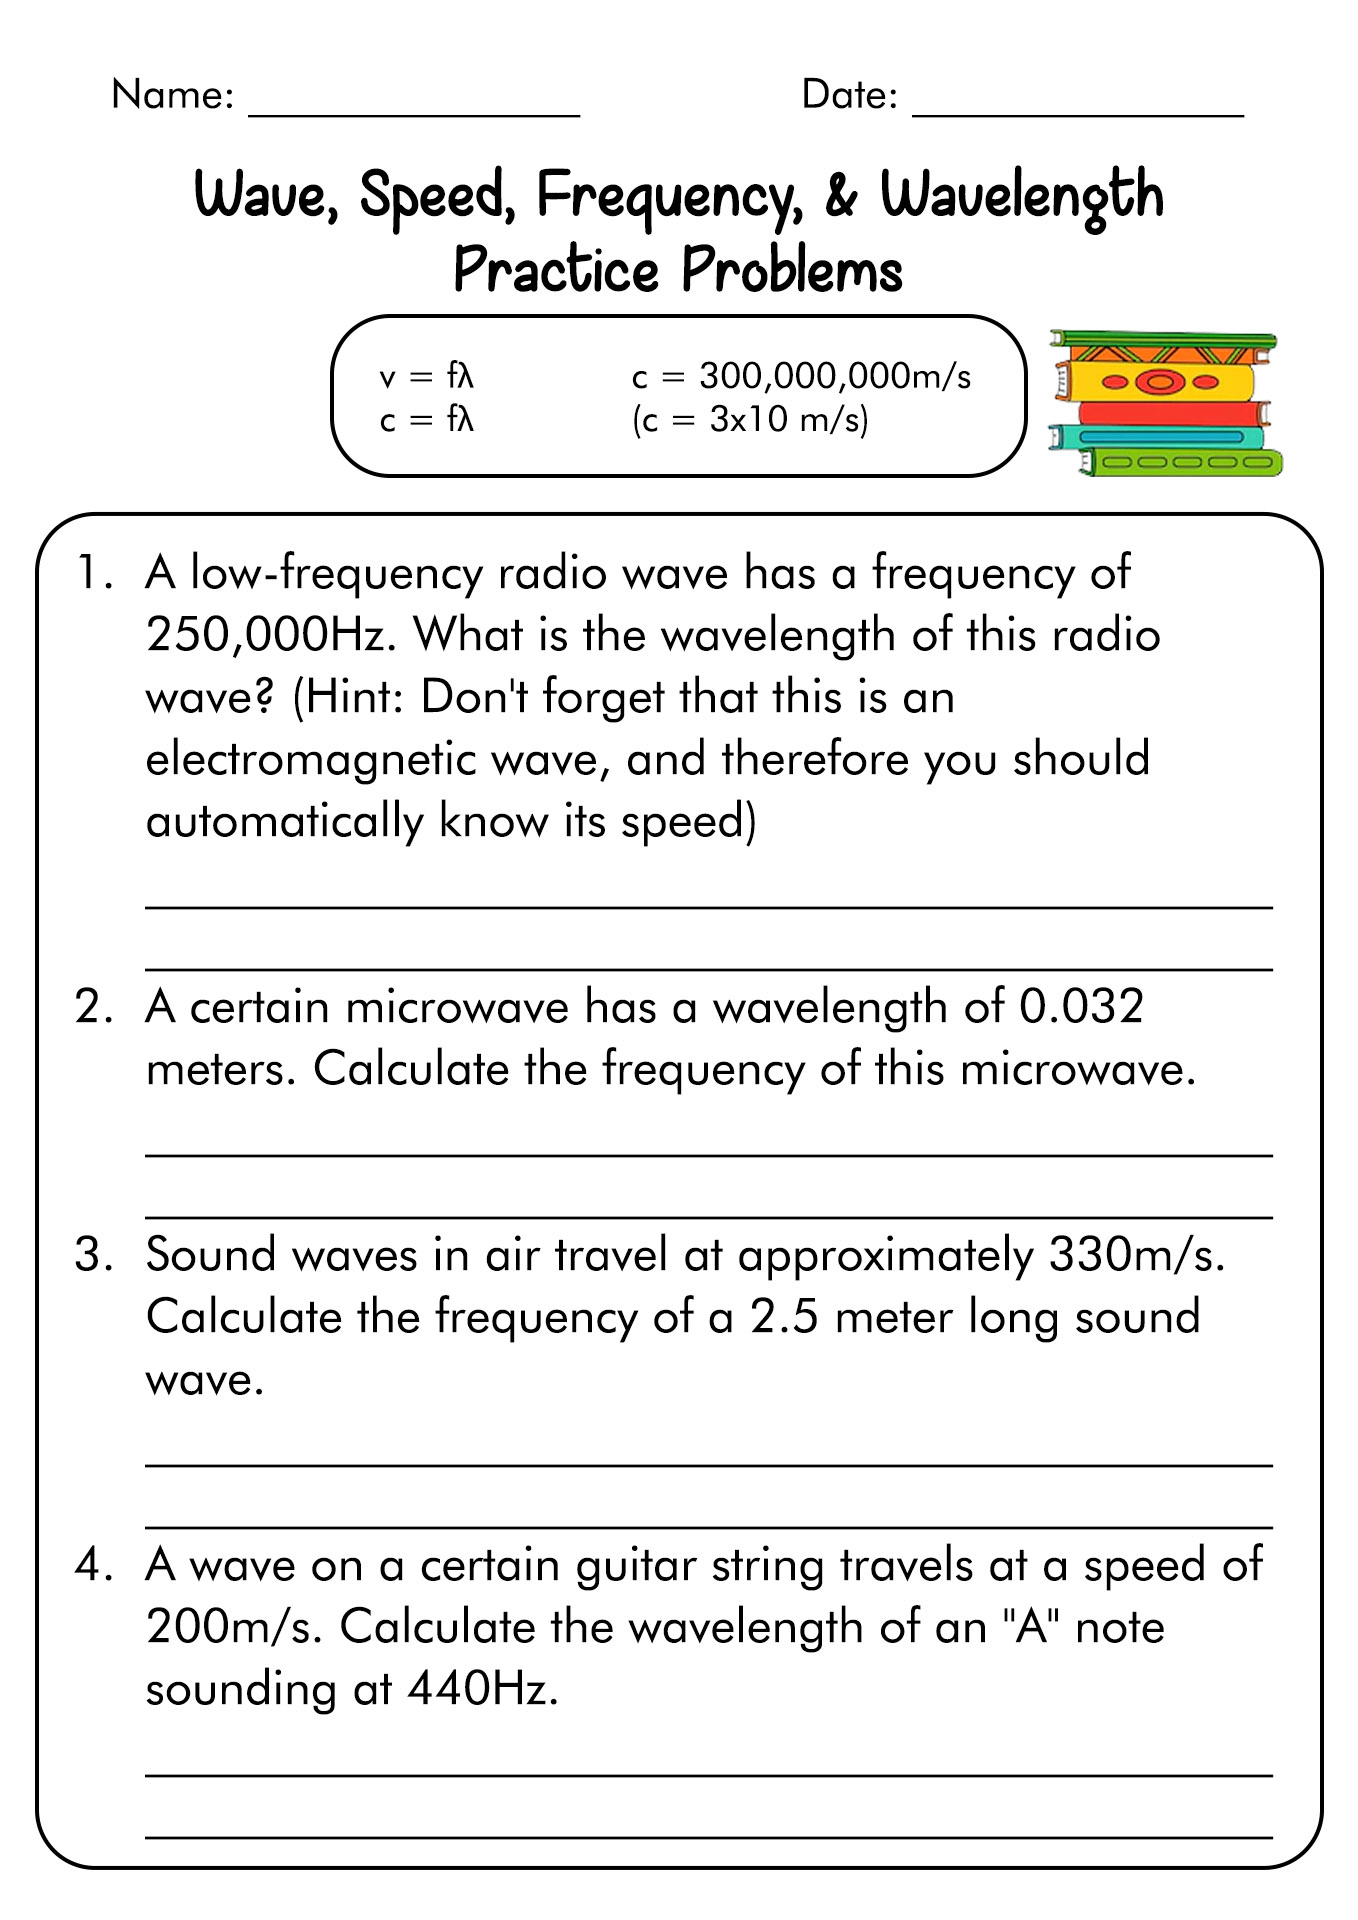 17-best-images-of-speed-formula-worksheet-speed-and-velocity-worksheets-middle-school-speed